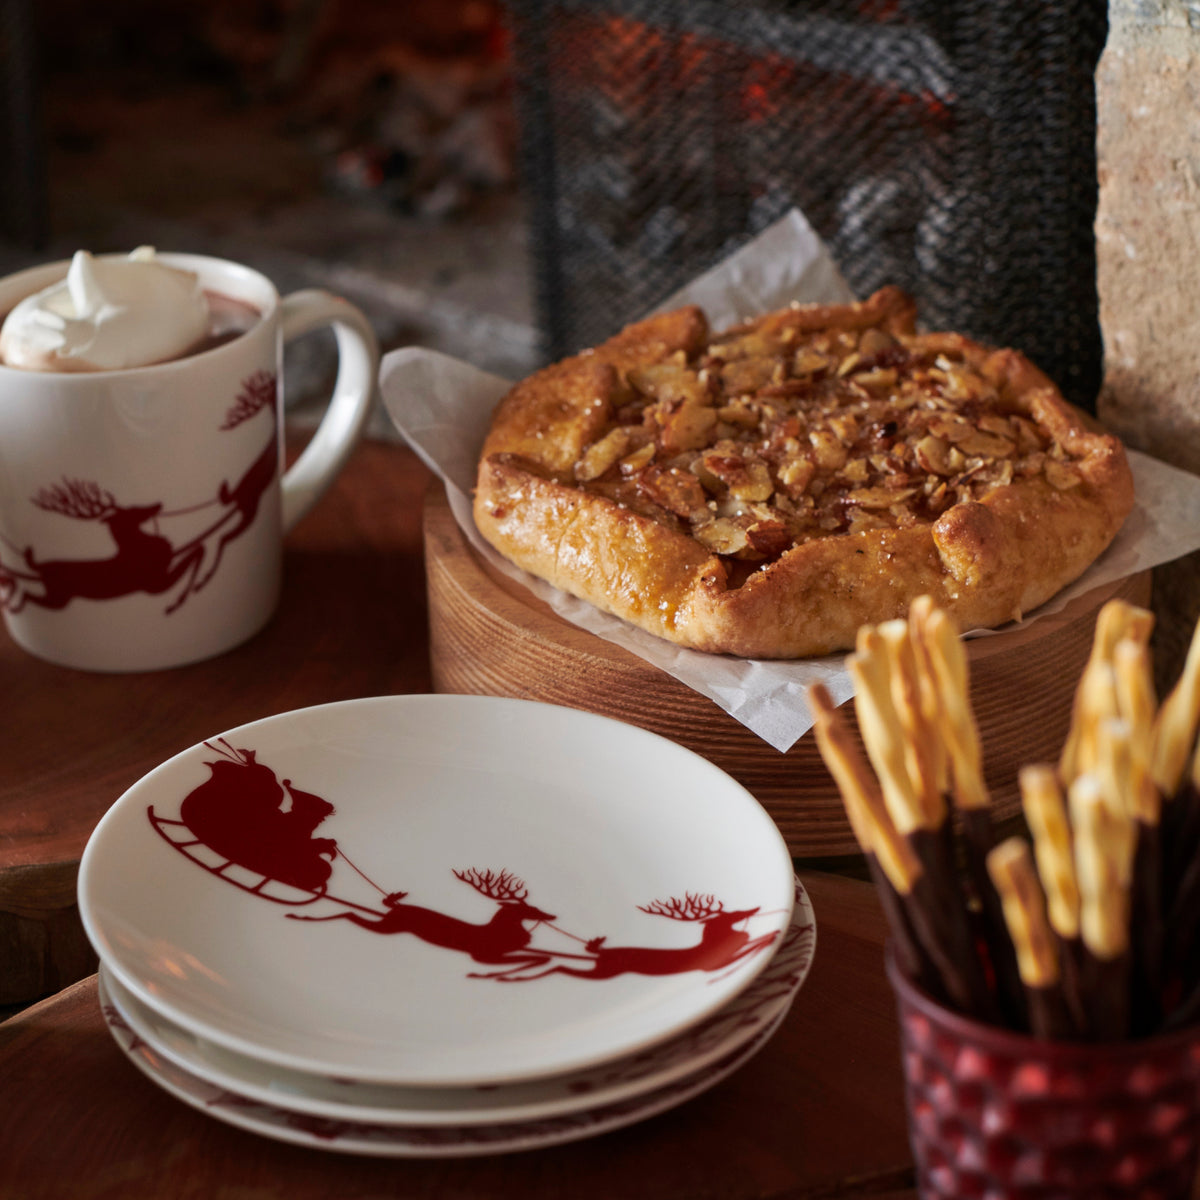 A Sleigh Canapé Plates with a pastry and a cup of coffee perfect for the holiday table.